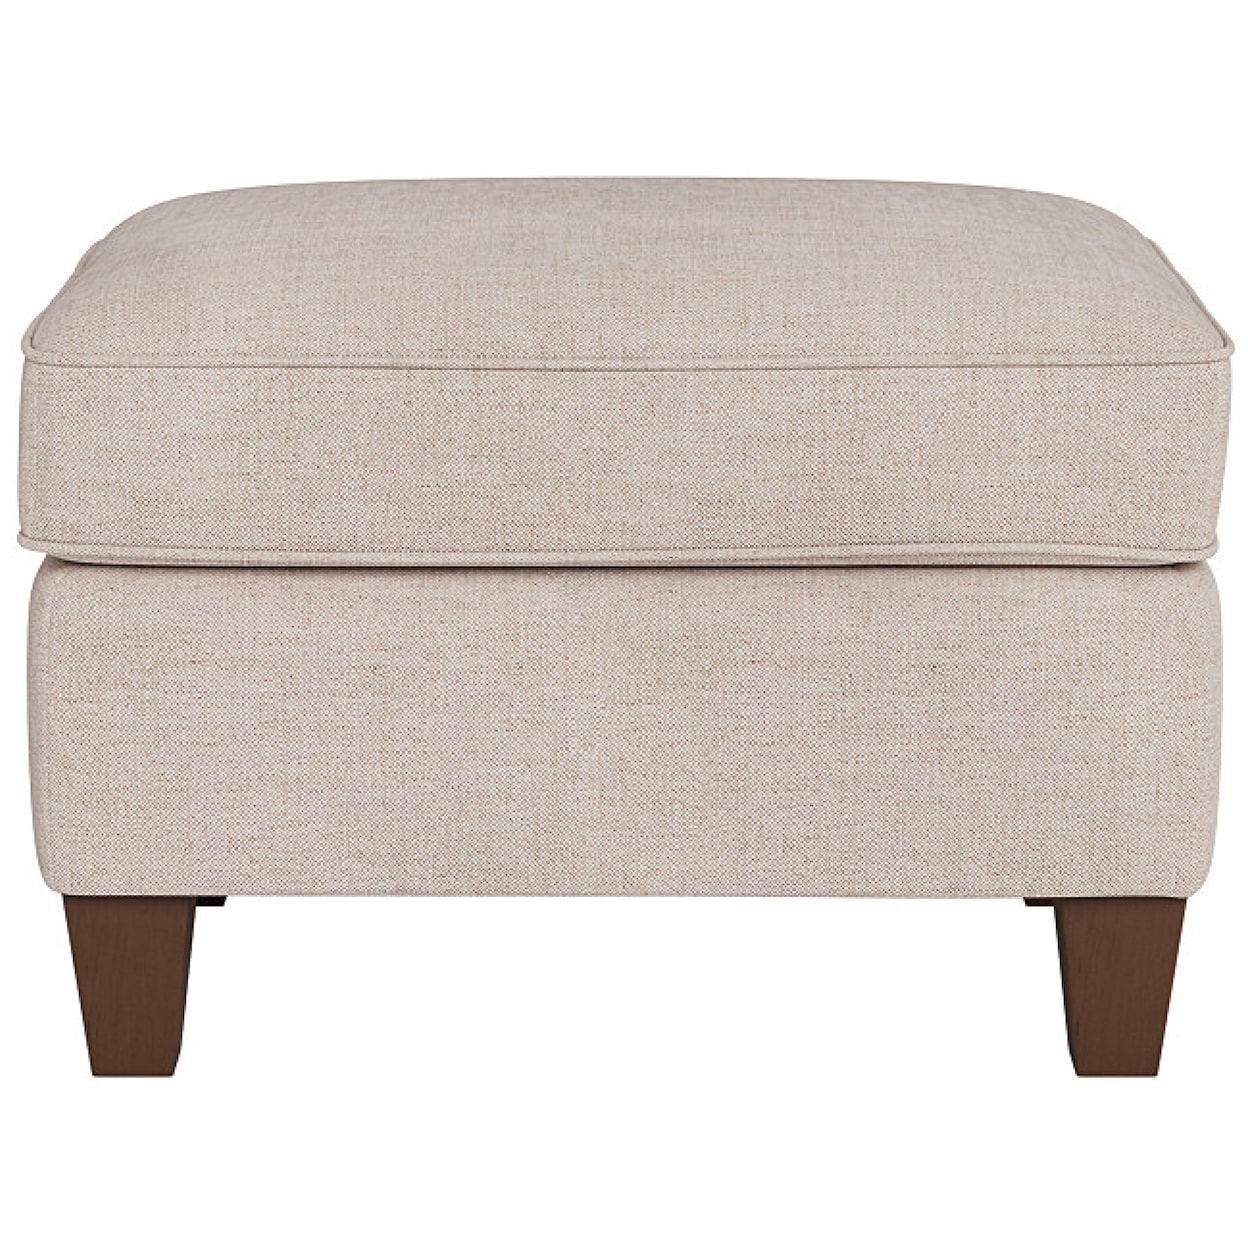 Universal Special Order Blakely Ottoman